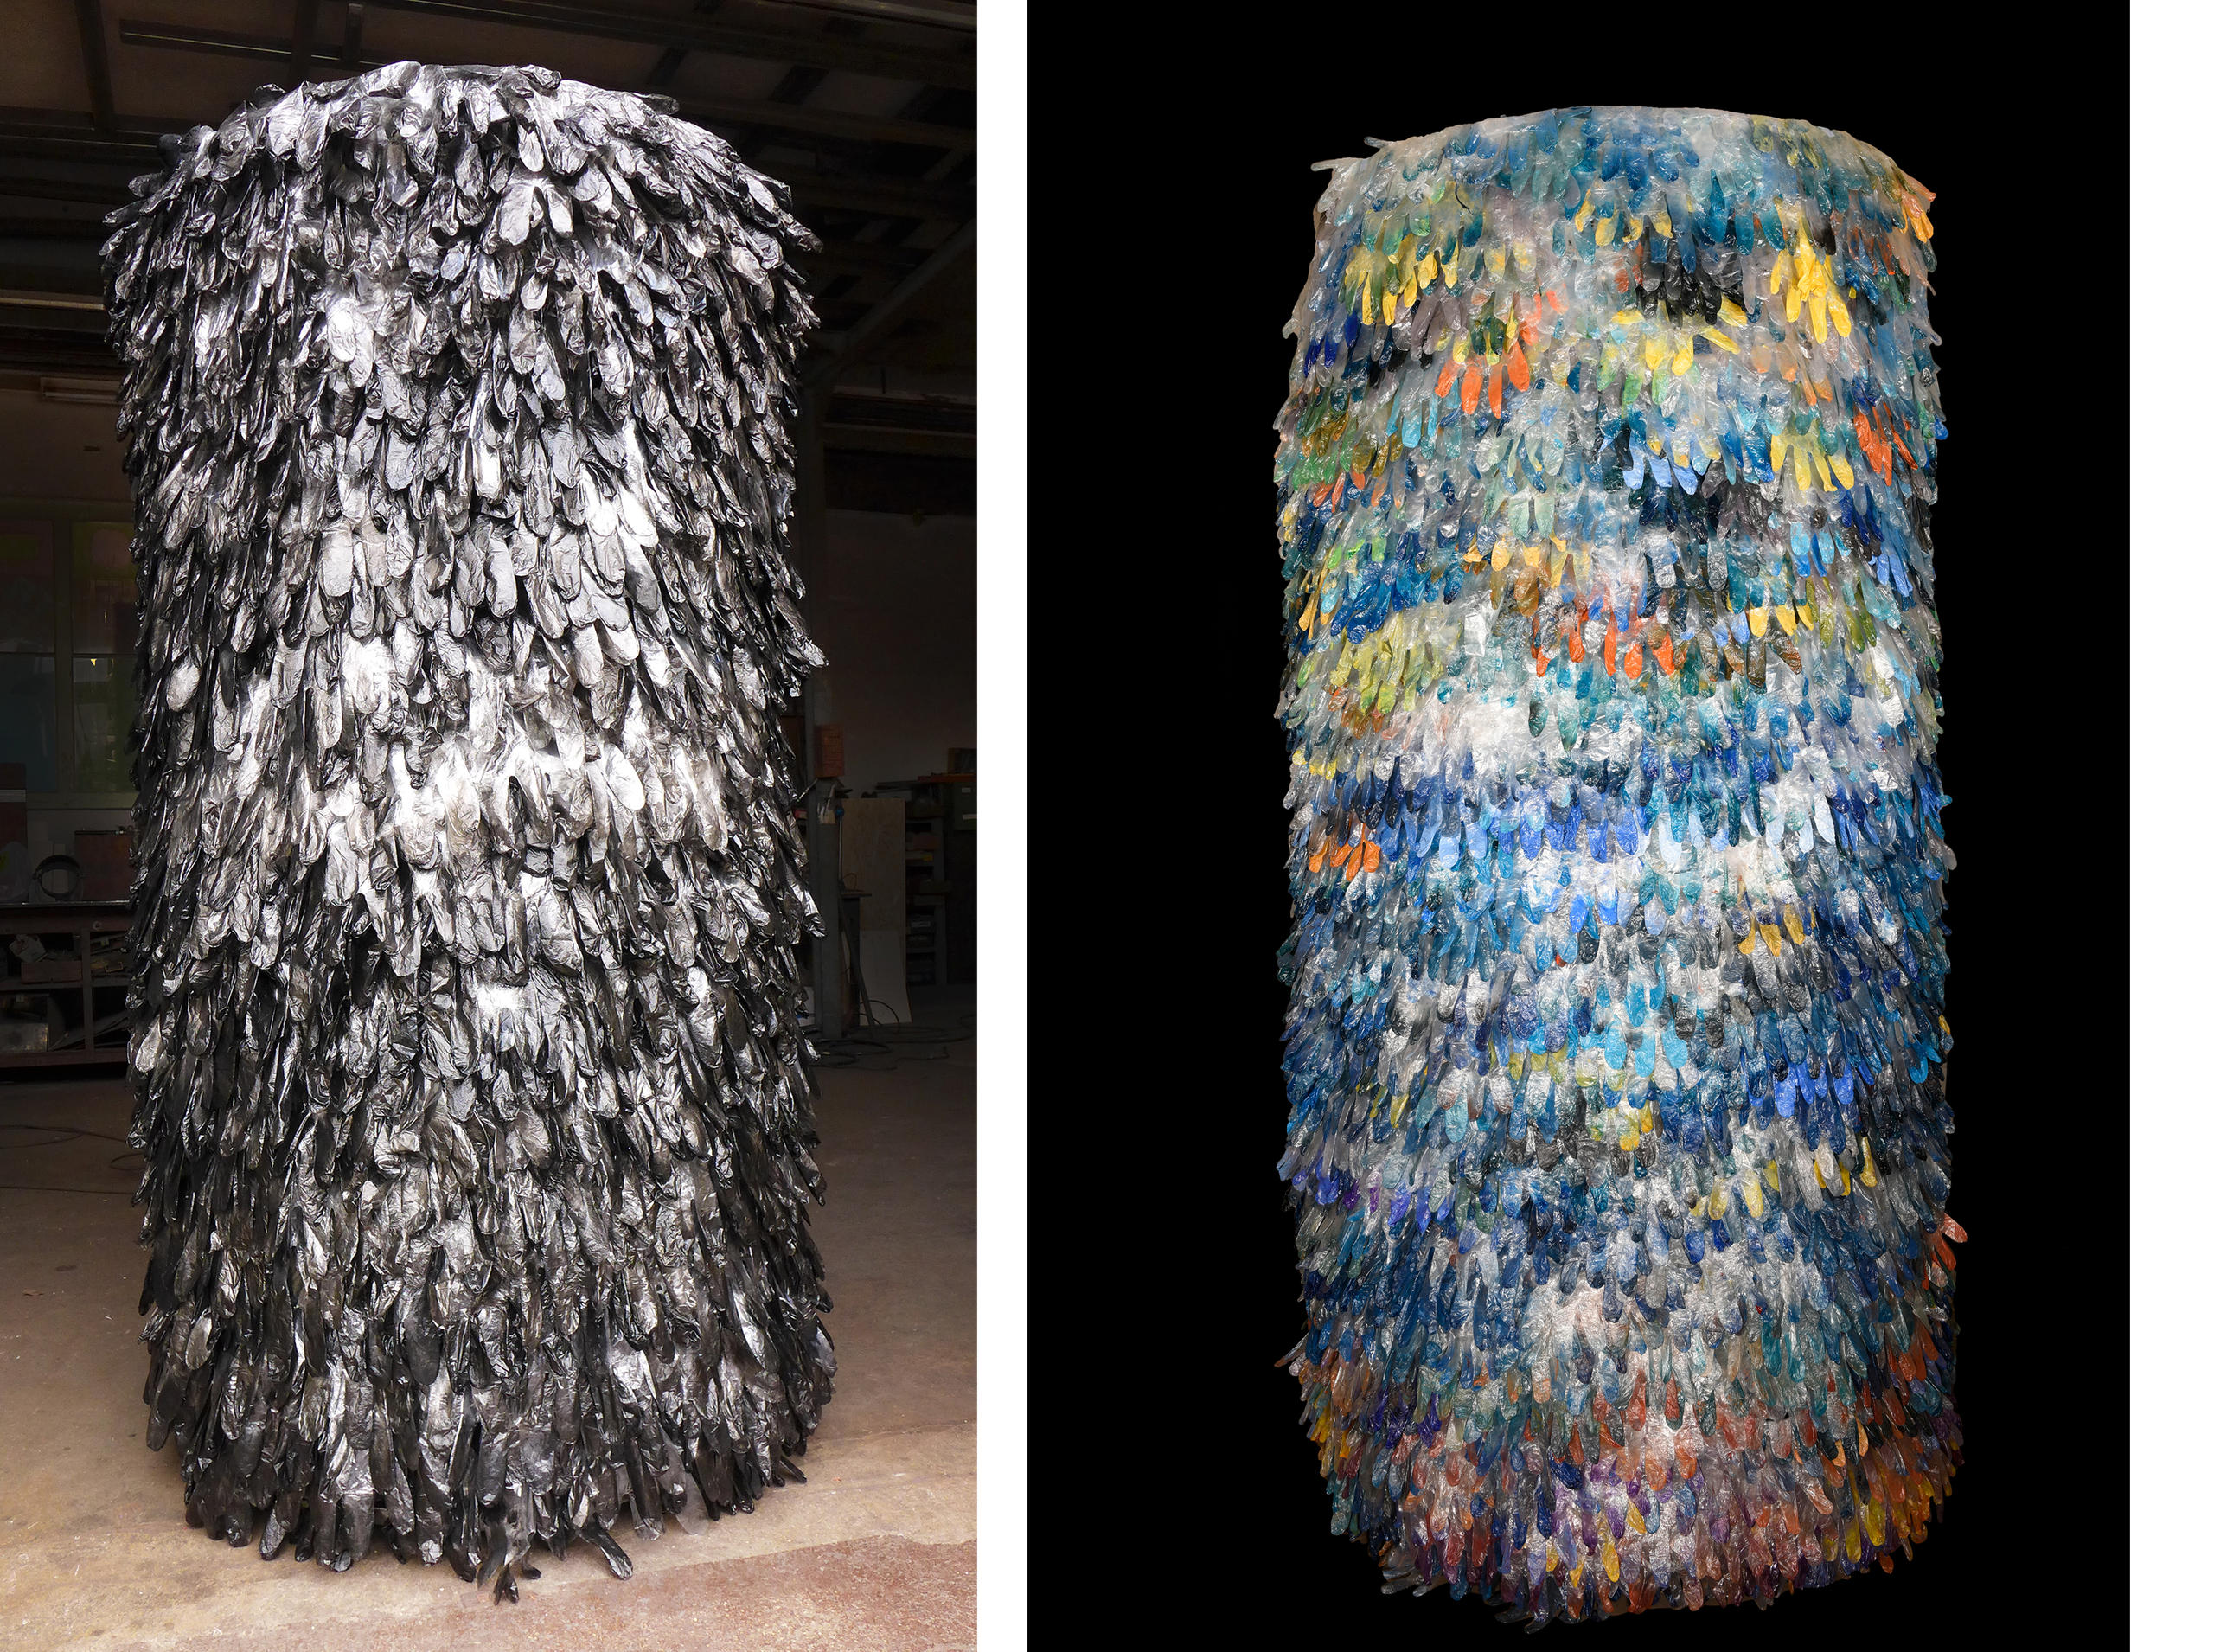 A sculpture made from plastic gloves